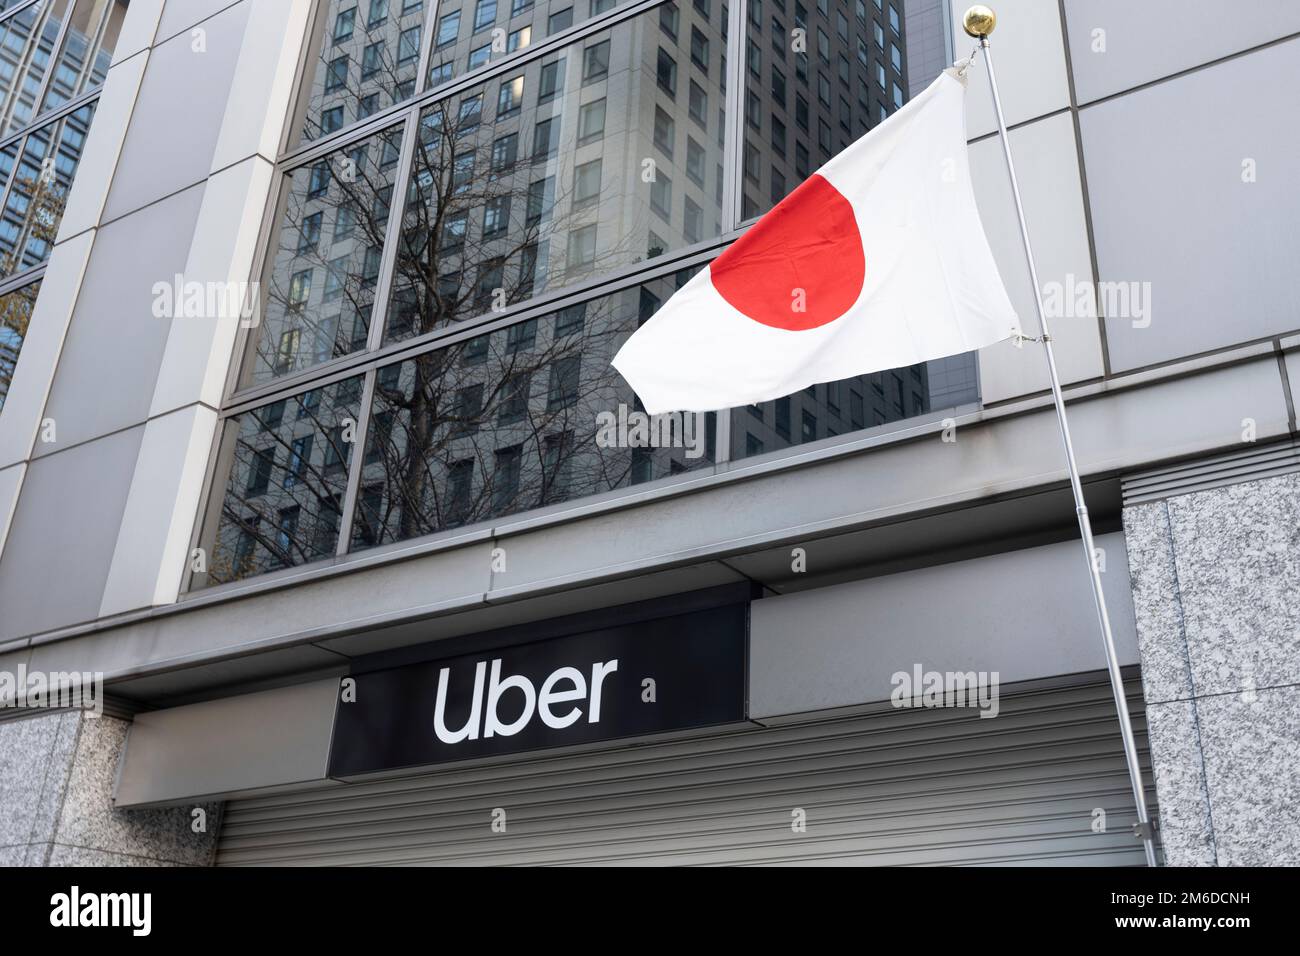 Tokyo, Japan. 3rd Jan, 2023. A Tokyo Uber Office in Nihombashi. The San Francisco-based rideshare company is authorized by Japanese regulatory officials to do business contracting with formal black livery cabs in Japan but faces stricter regulation than normally allowed in America. Japan has recently reopened to tourism after over two years of travel bans due to the COVID-19 pandemic. The Yen has greatly depreciated against the USD US Dollar, creating economic turmoil for international trade and the Japanese economy. Japan also is now experiencing a daily count of over 100,000 new COVID-19 Stock Photo